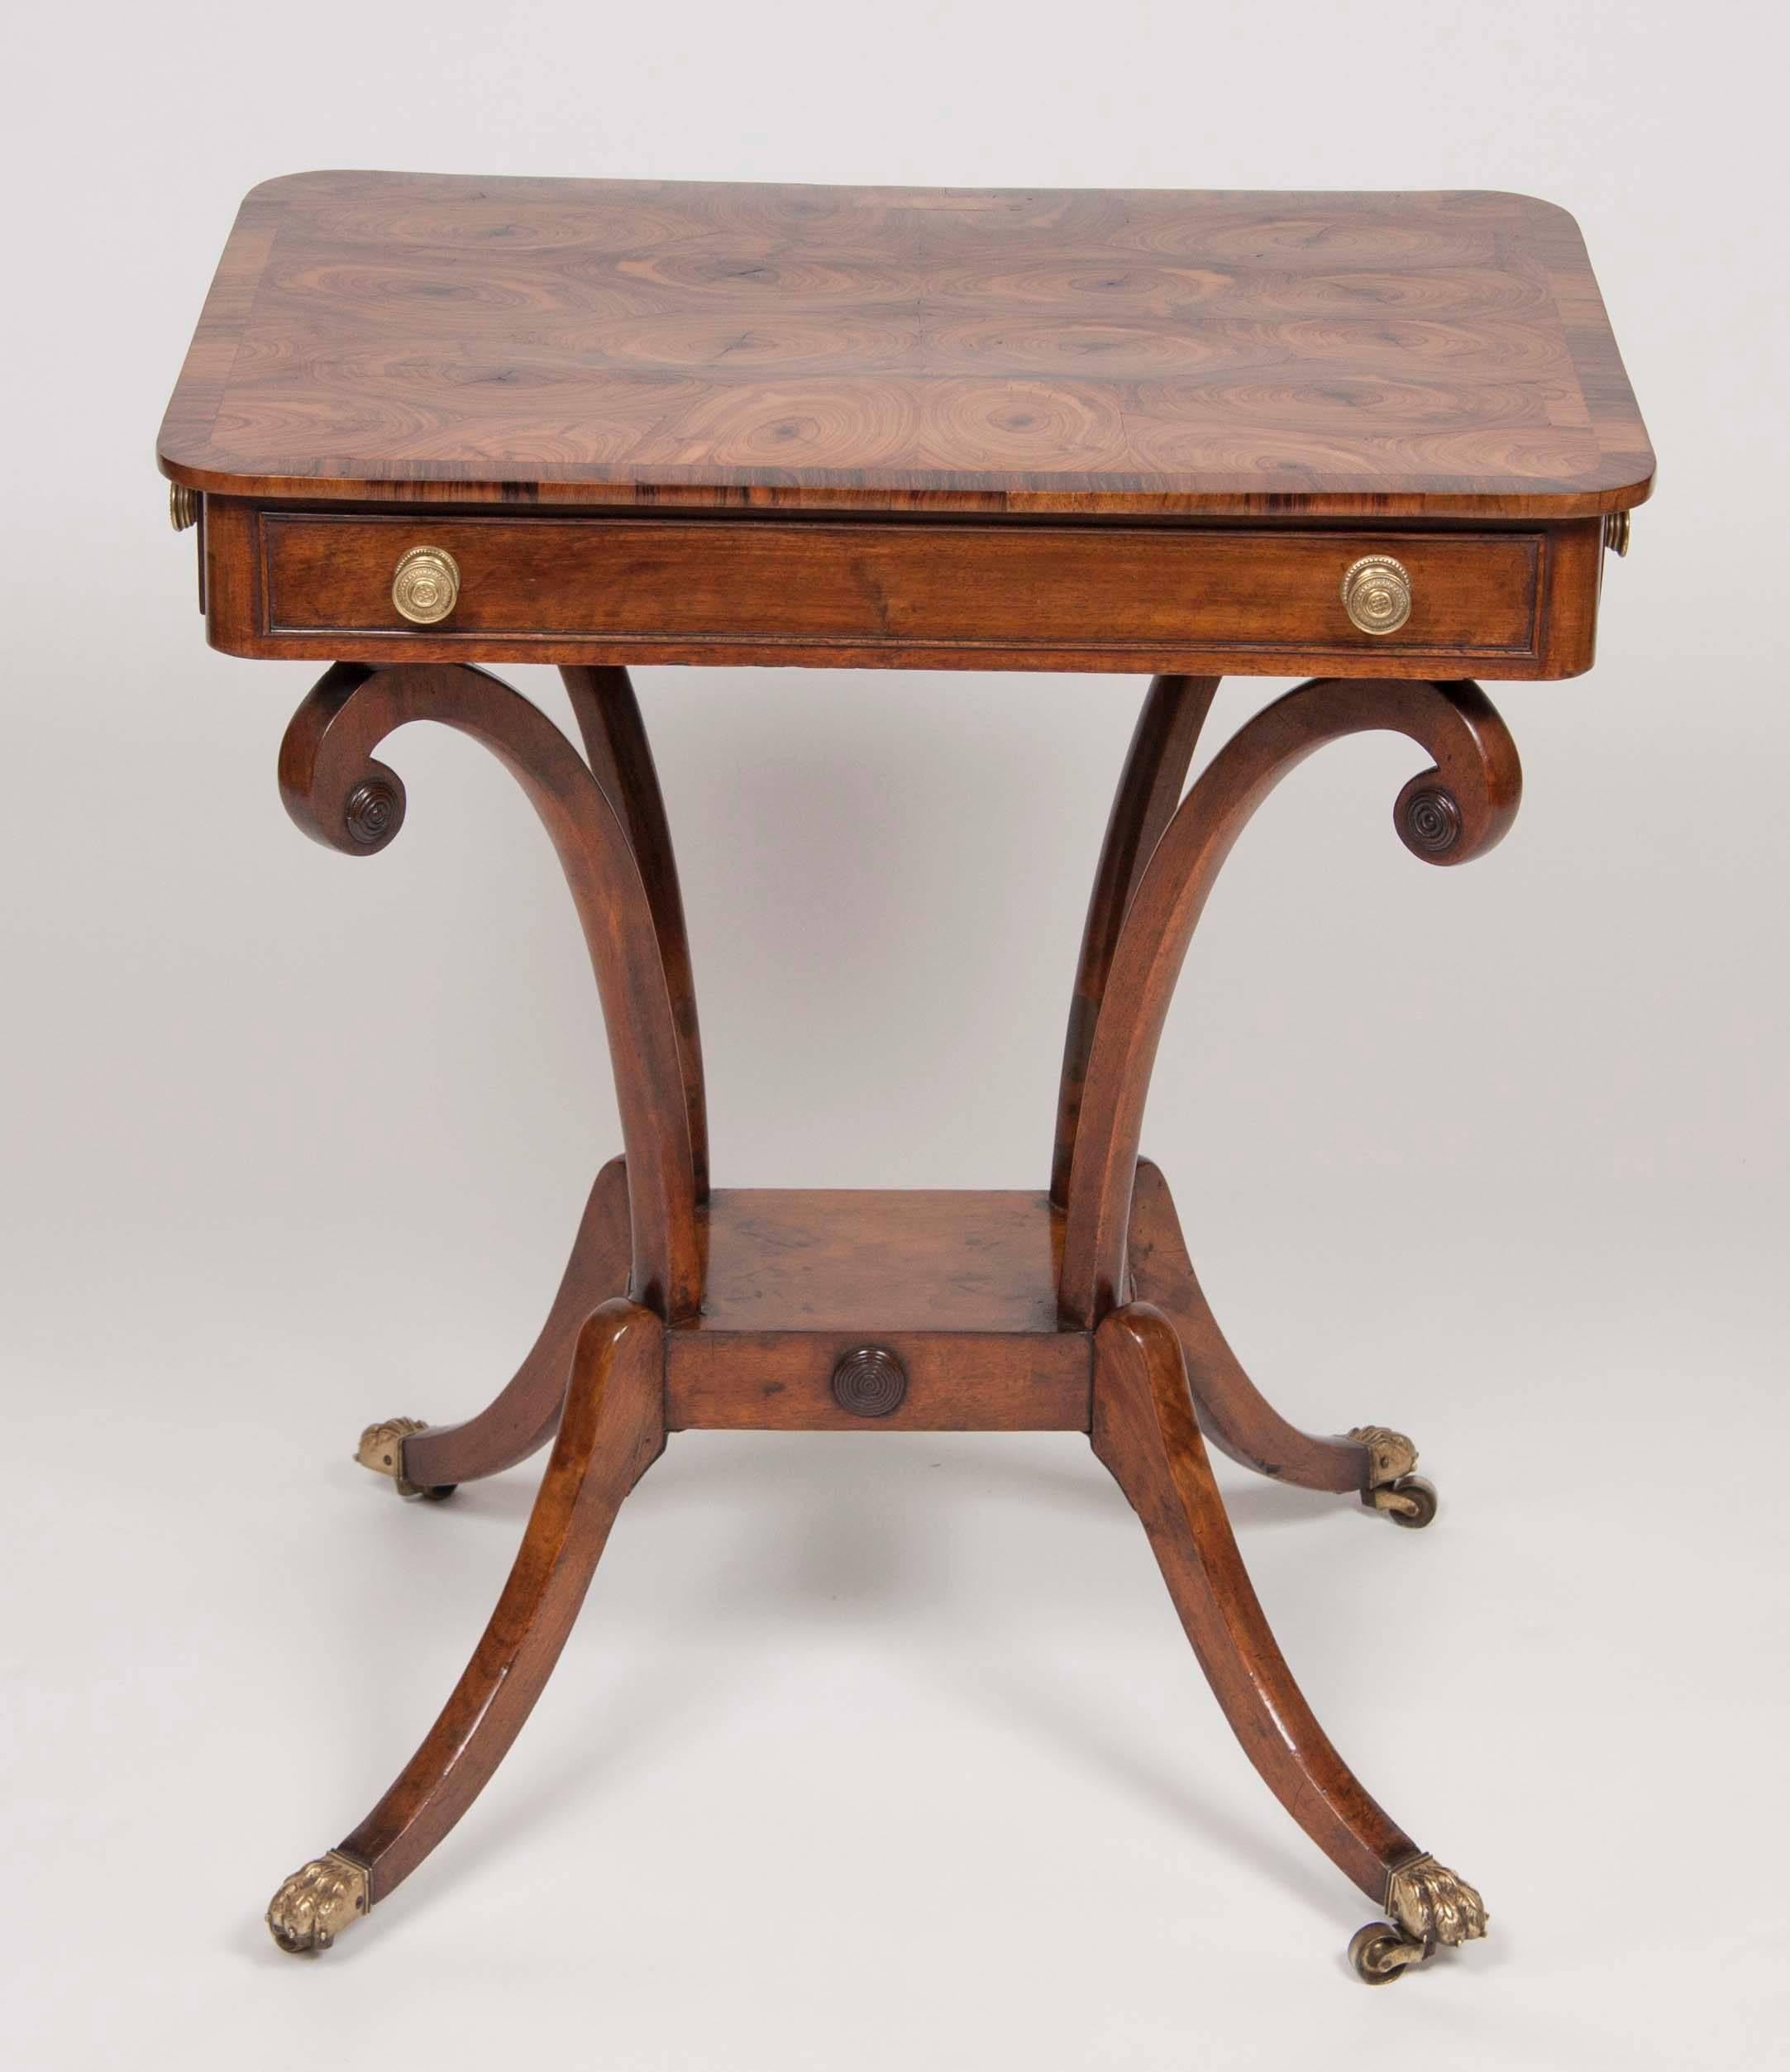 English Pair of Regency Oyster Veneer and Mahogany End Tables